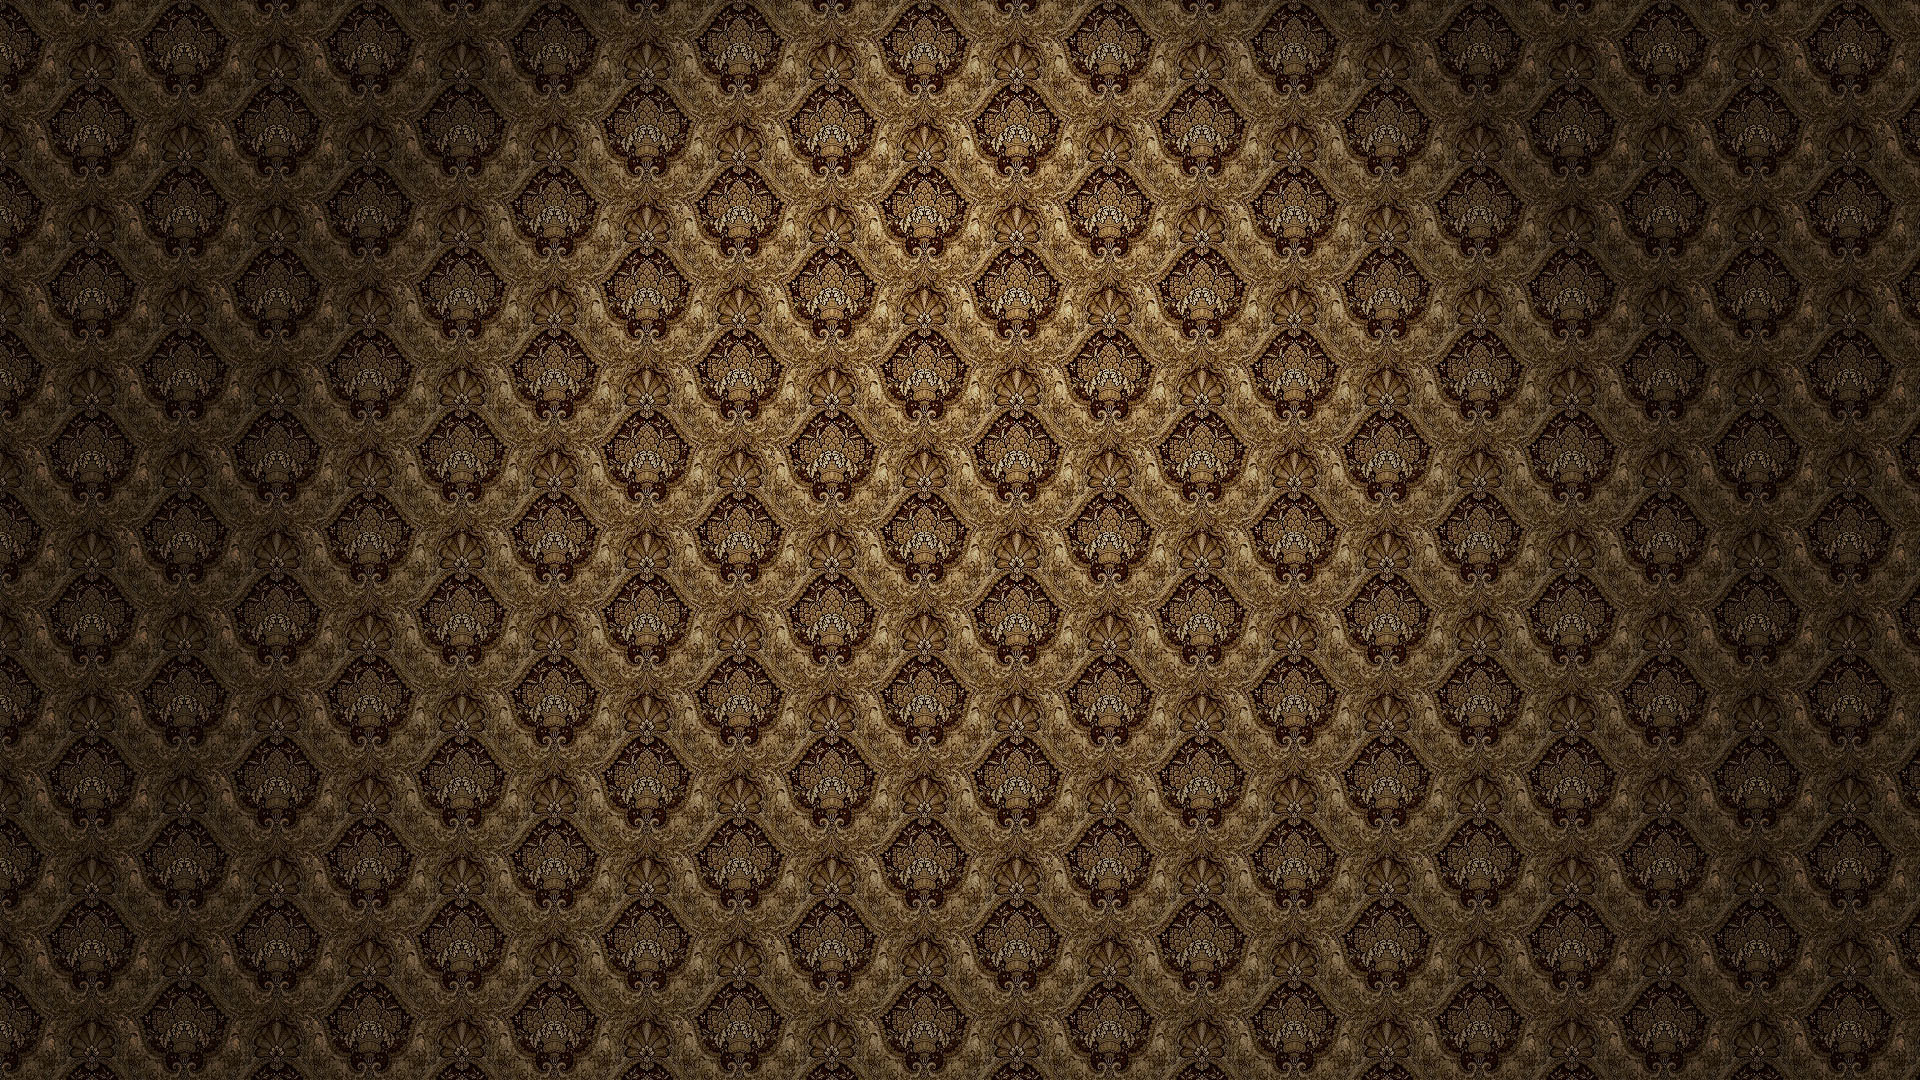 1920x1080 Pattern is also very evident on both the floor and the wallpaper. It almost  looks